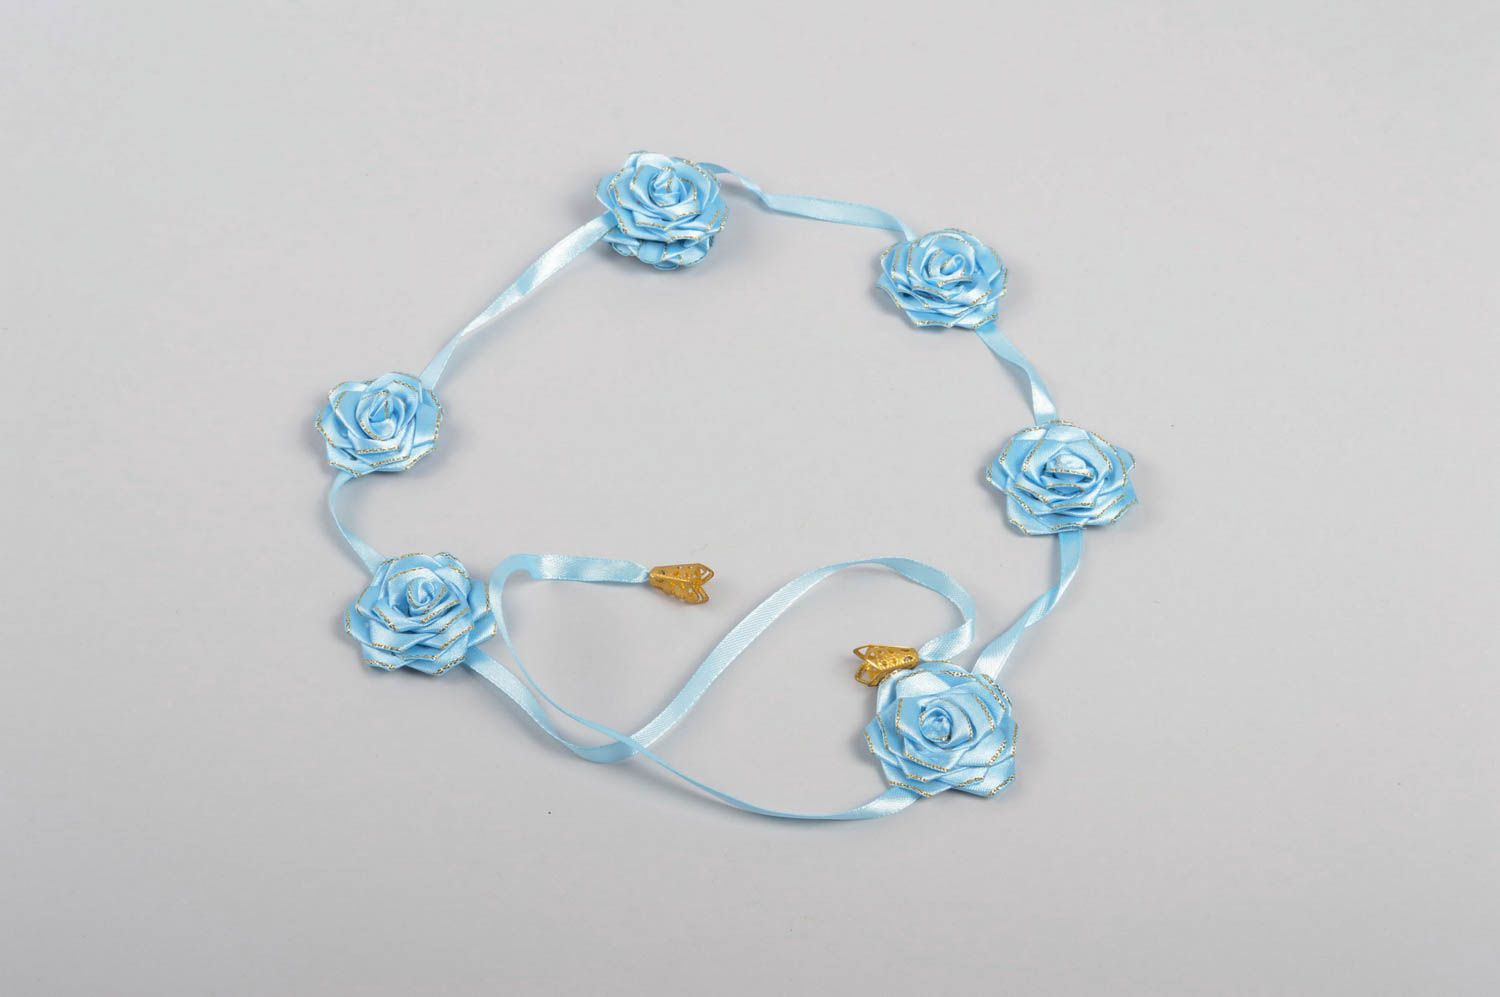 Handmade hair band jewelry for hair with roses hairband with flowers best gift photo 3